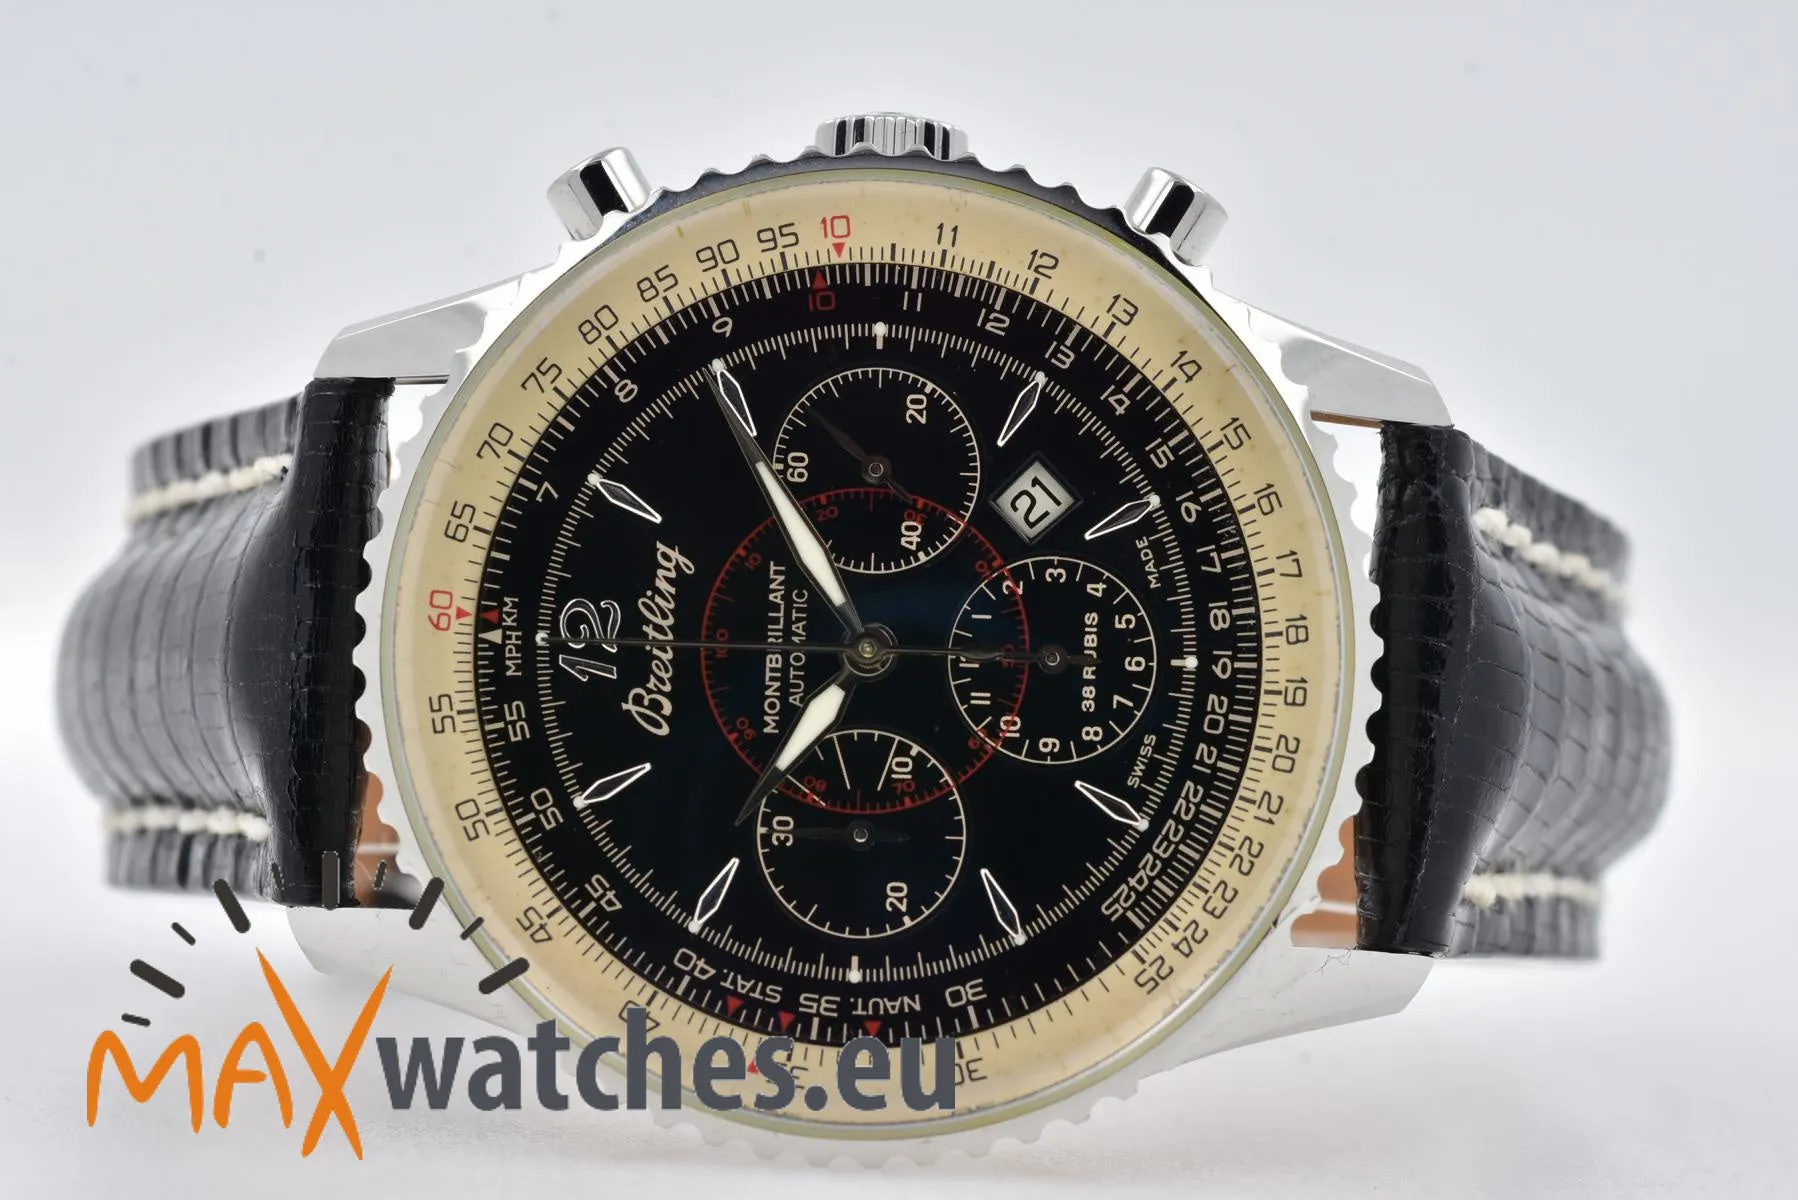 Breitling Montbrillant A41330 38mm Stainless steel Black